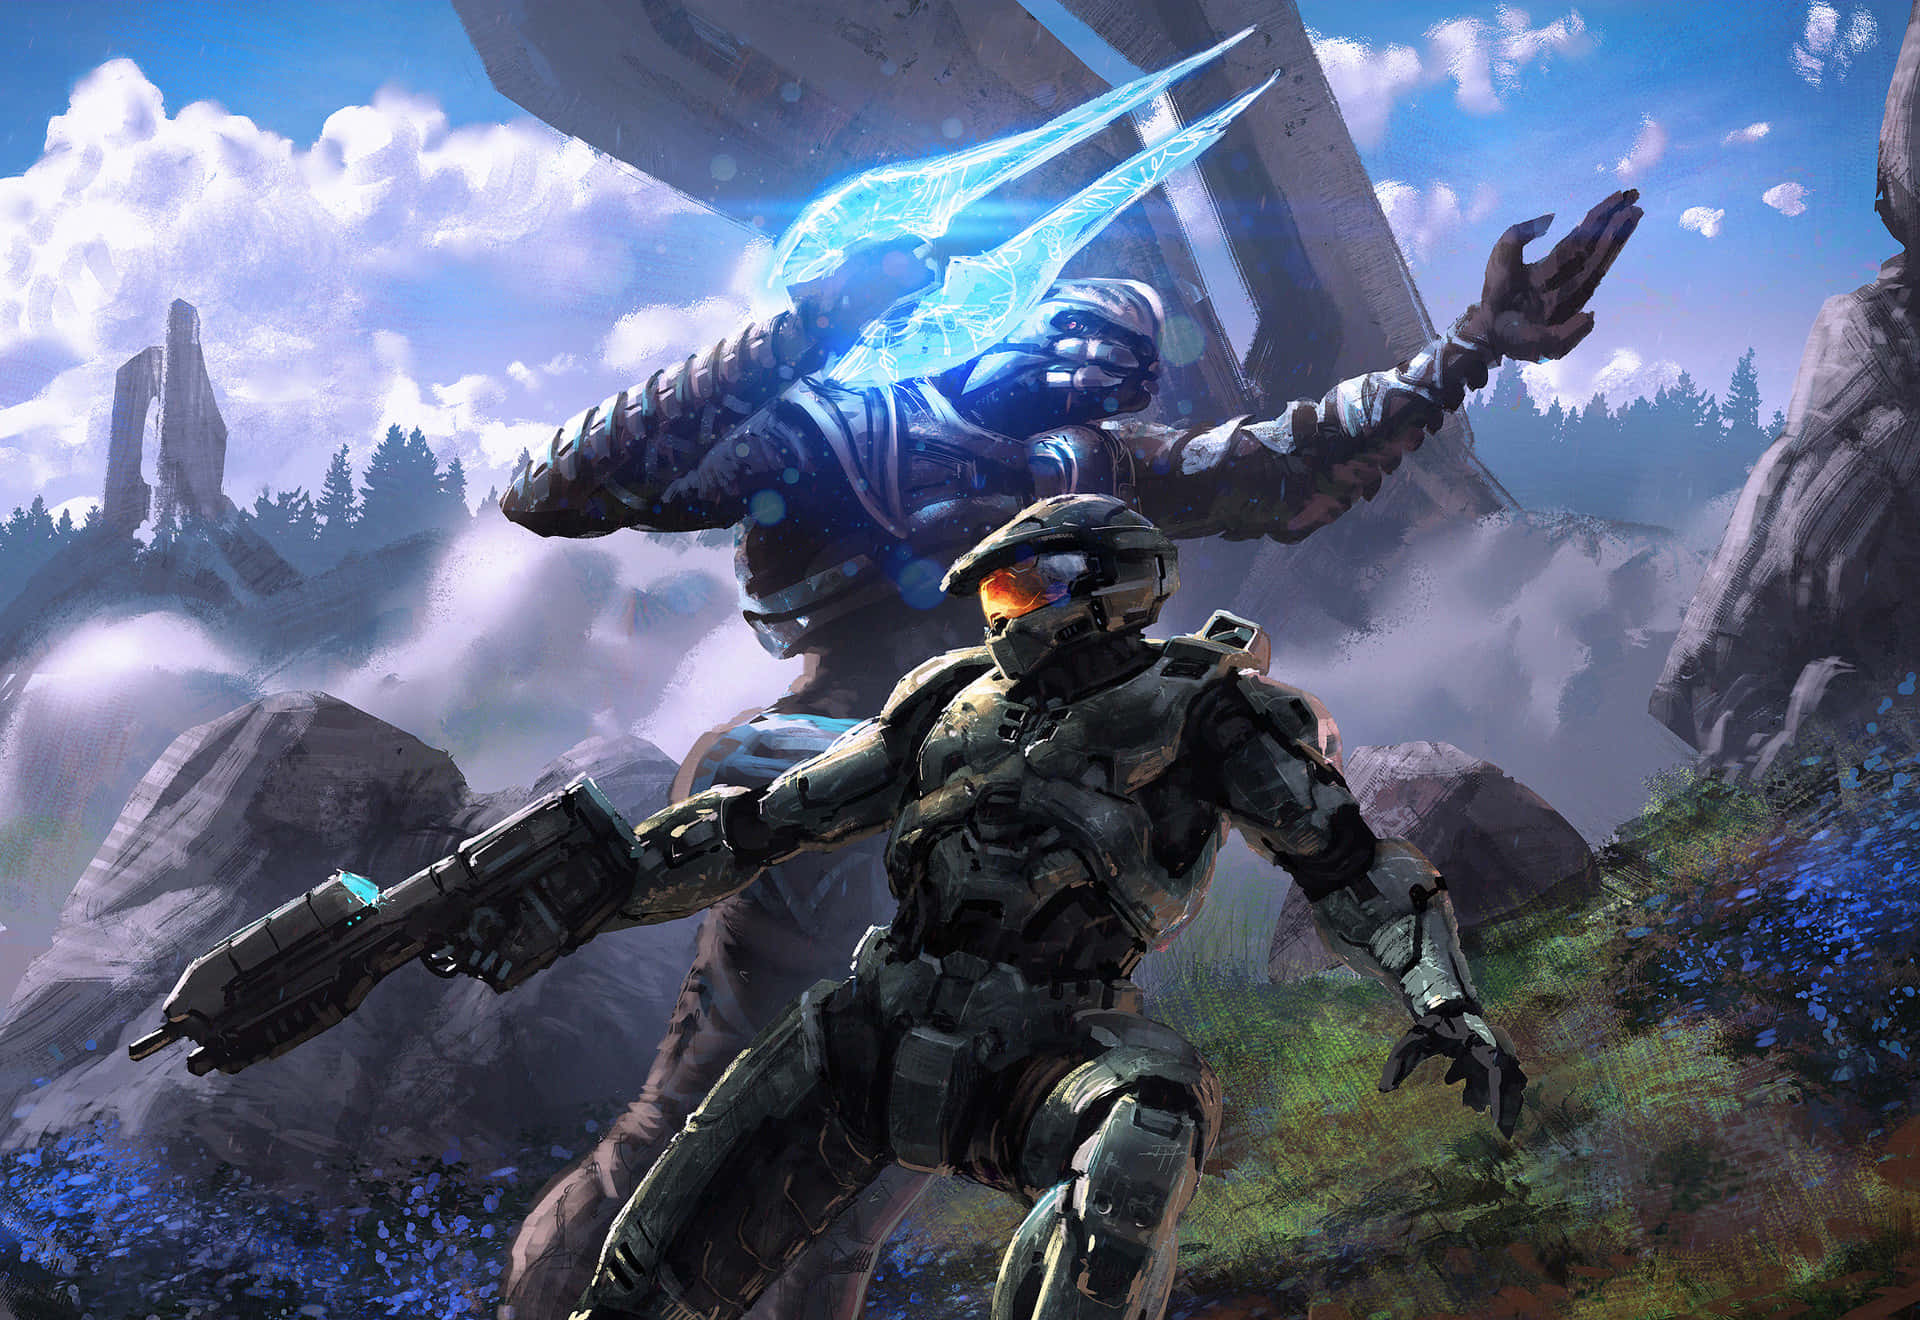 The Epic World of Halo Spartans Wallpaper